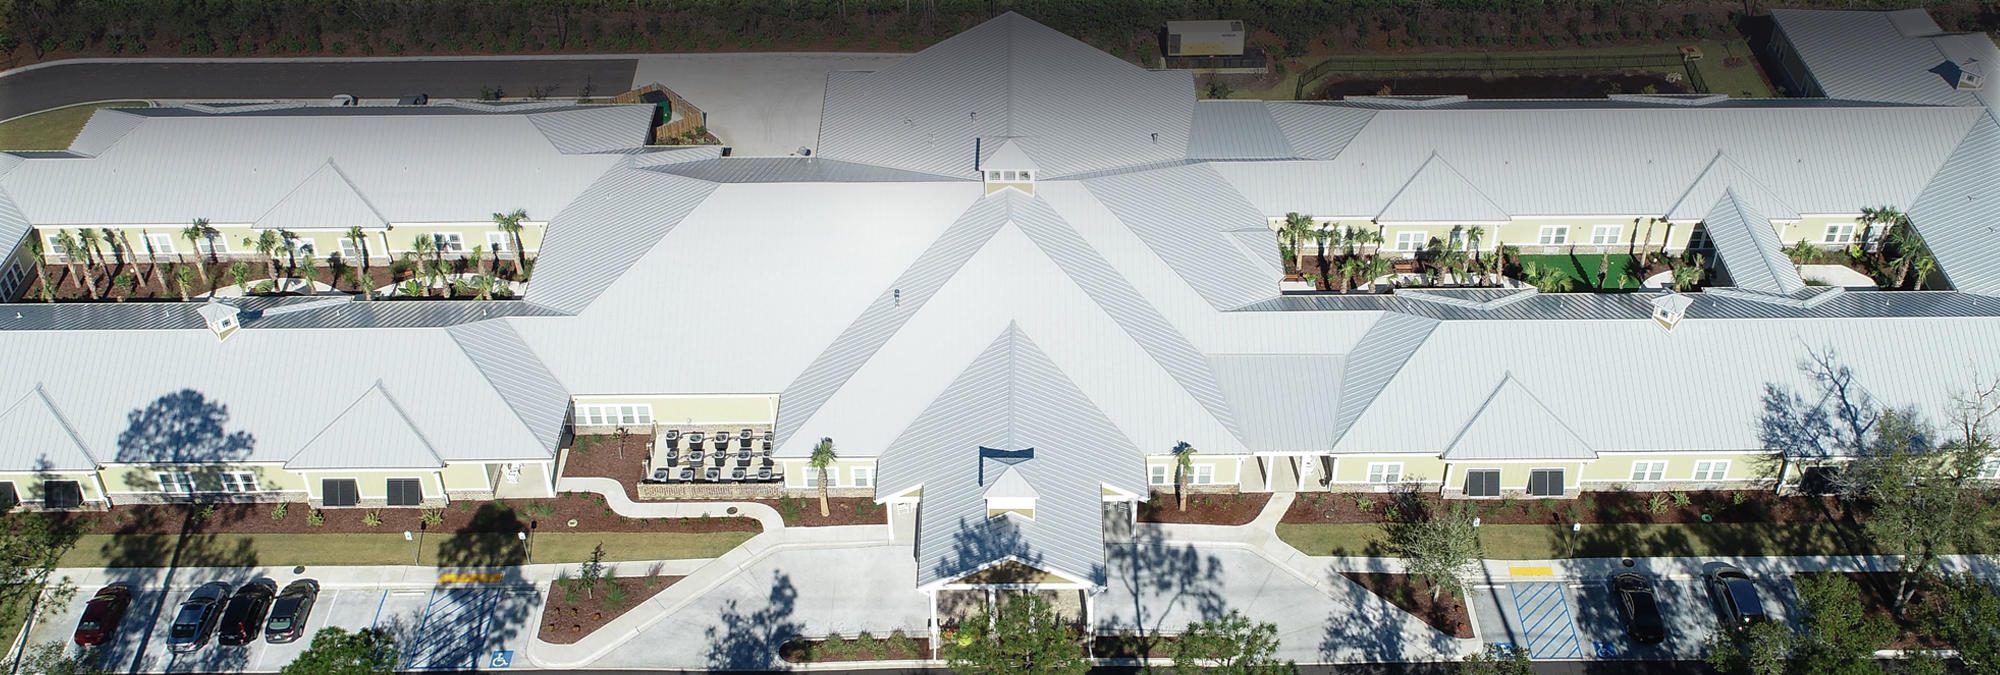 Myrtle Beach Commercial Roofing Company